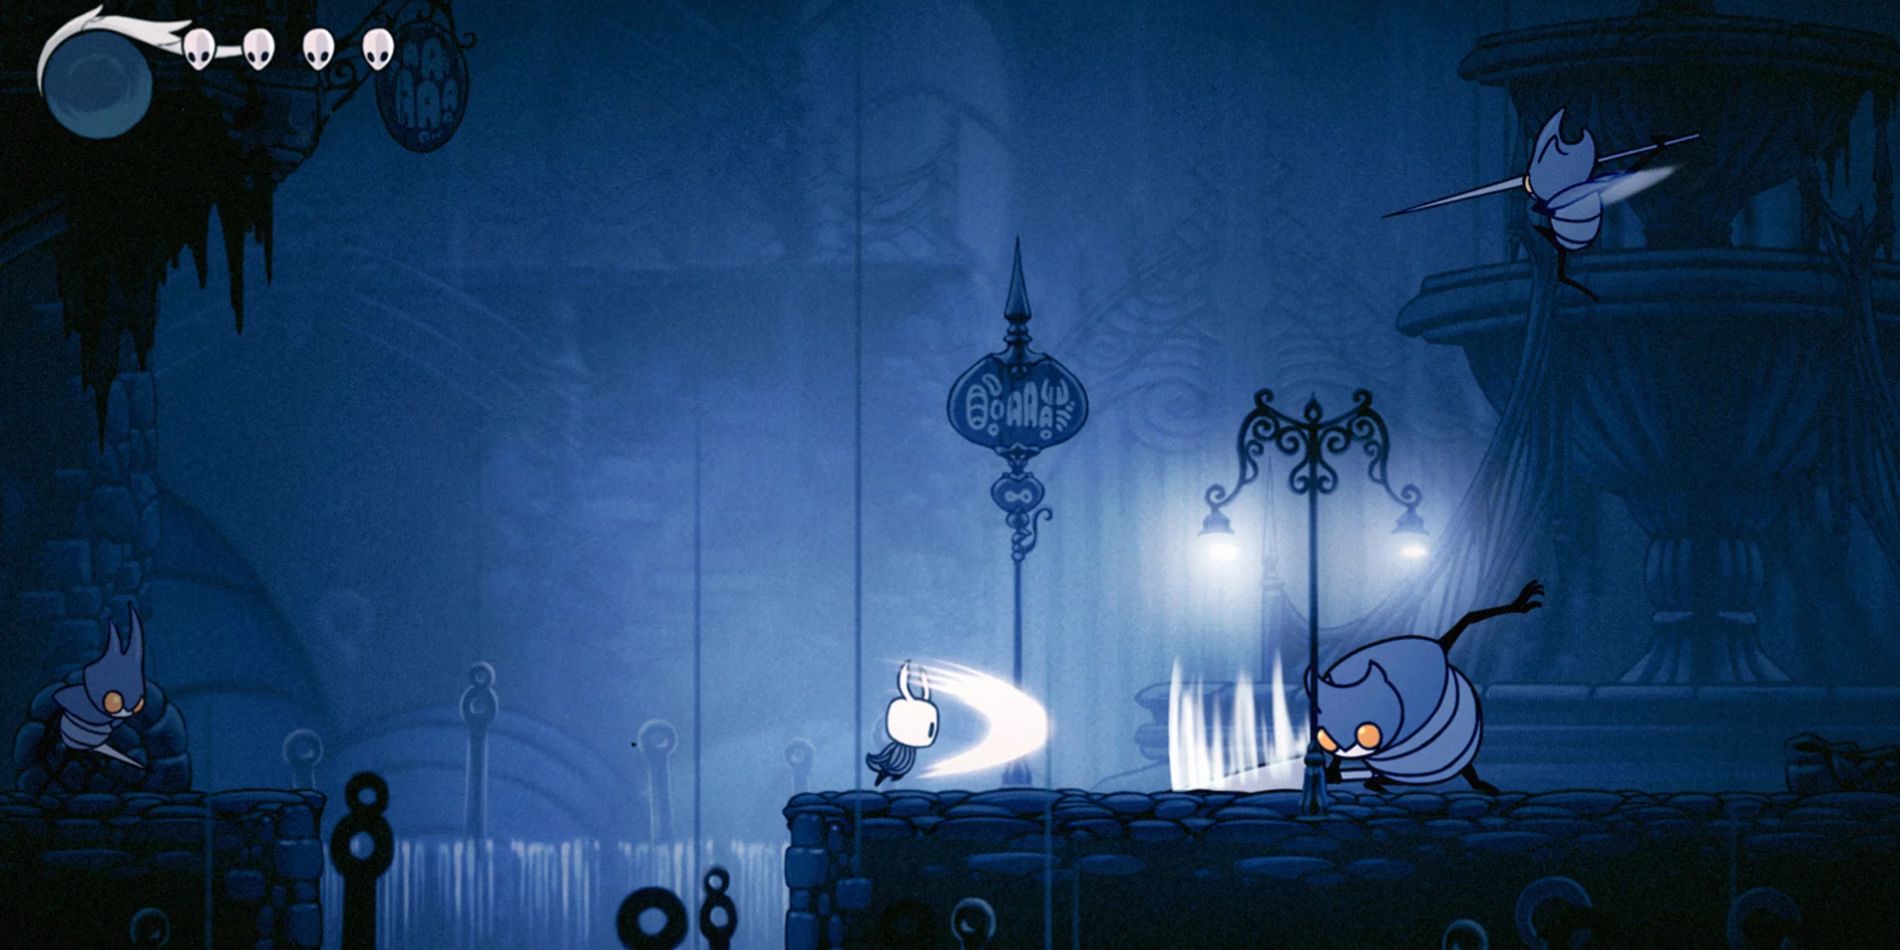 A knight battles a cat-like enemy at night in the Nintendo Switch game Hollow Knight.